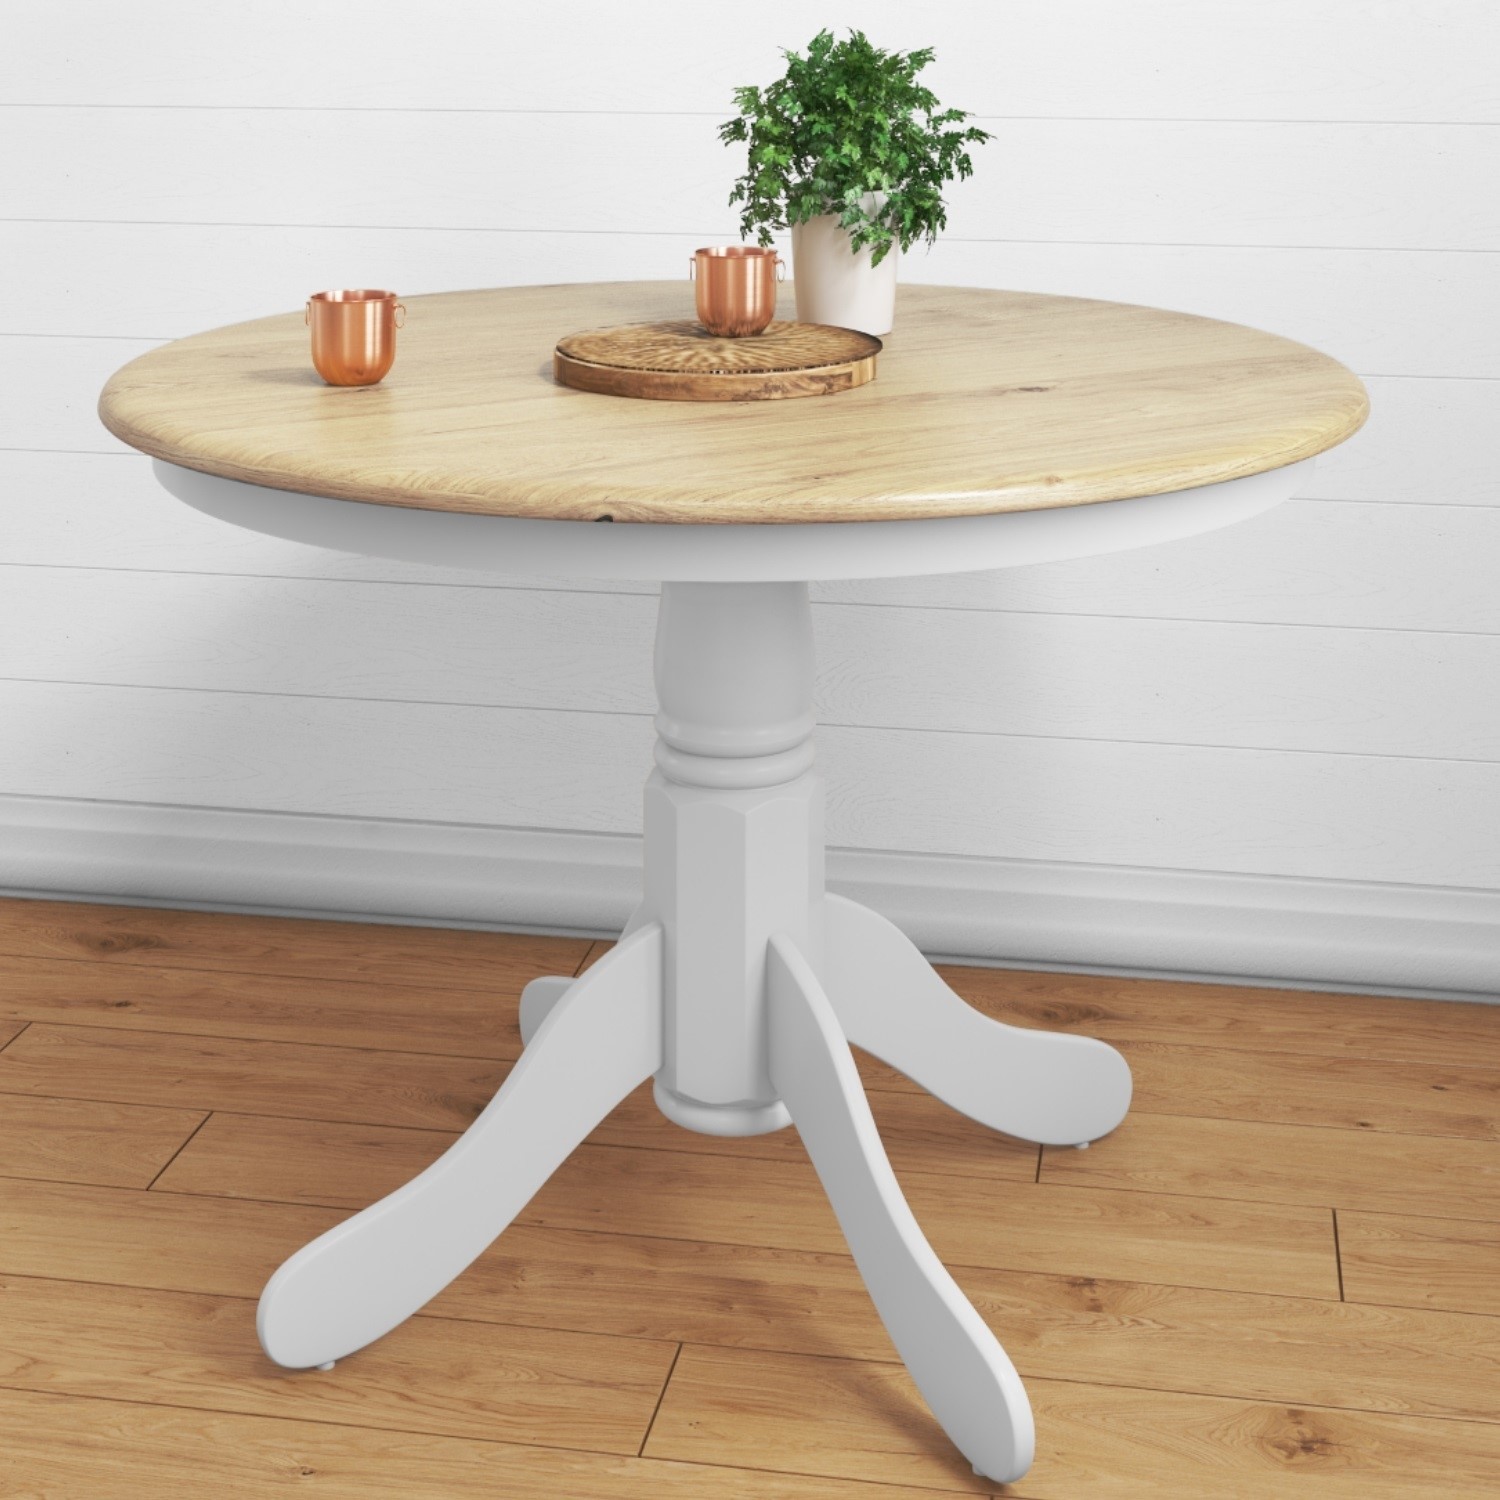 Round Pedestal Dining Table In White With Wood Top Seats 4